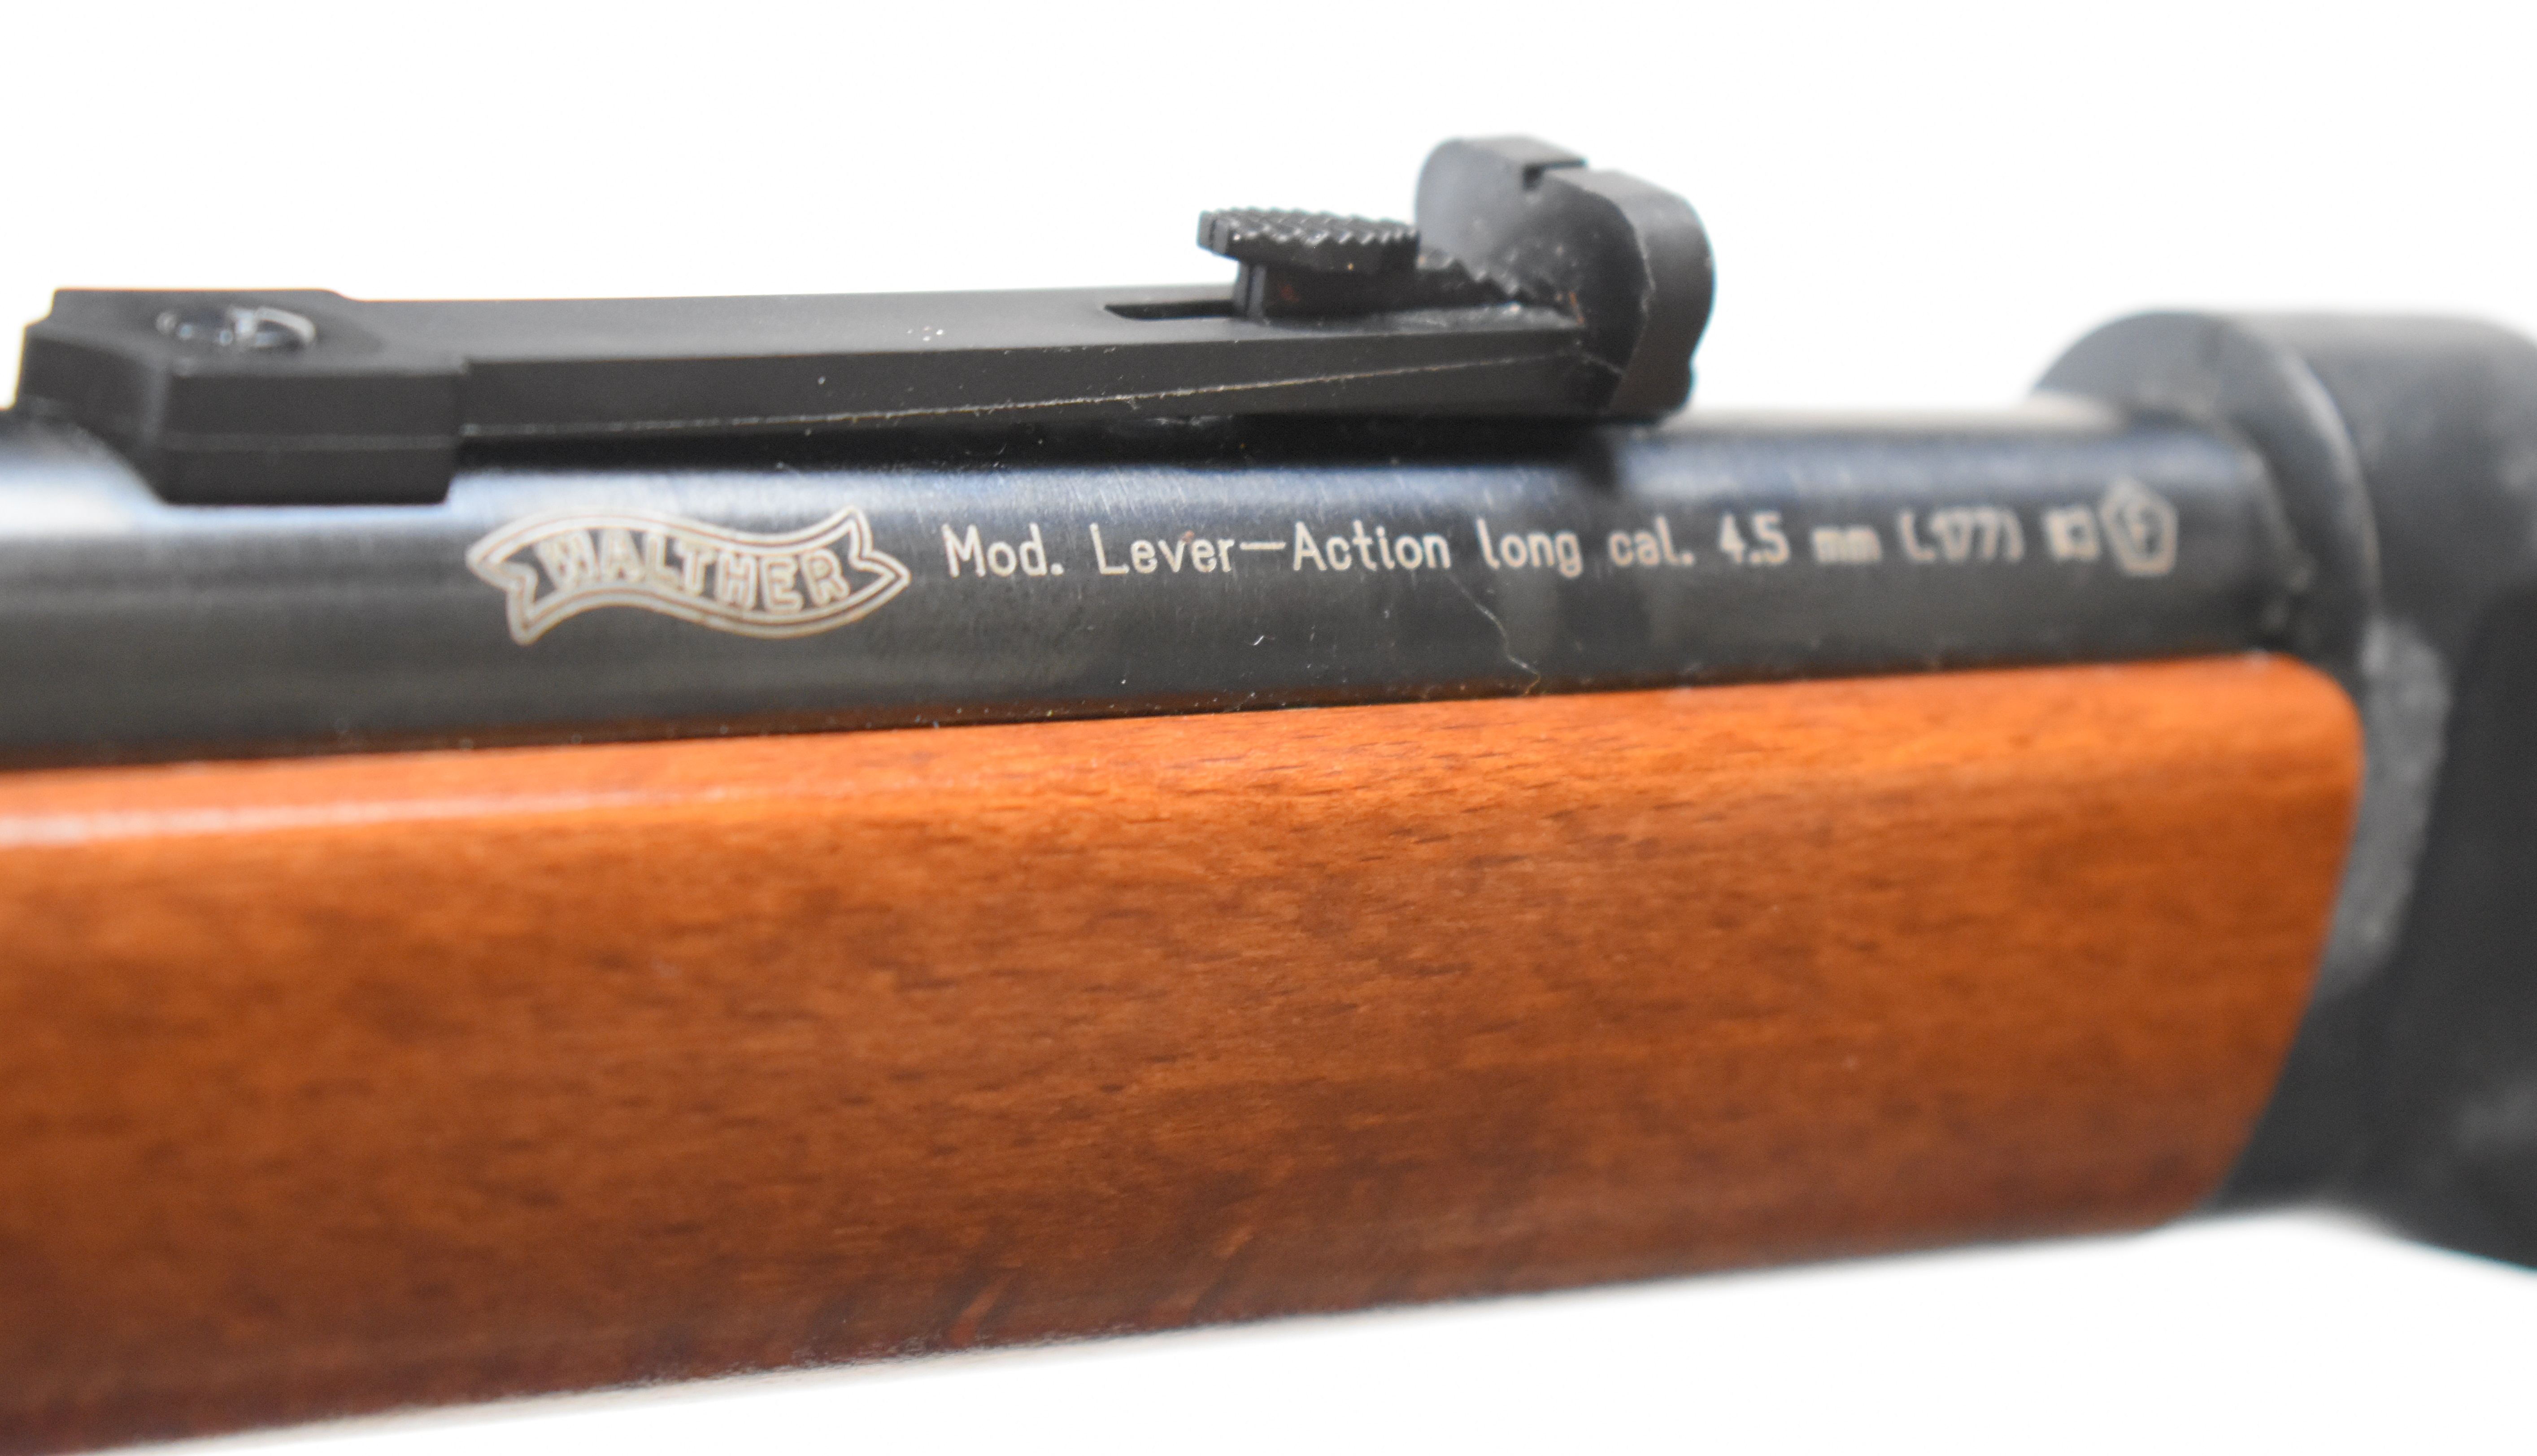 Walther Winchester style lever-action .177 CO2 carbine air rifle with two 8 shot magazines, - Image 10 of 11